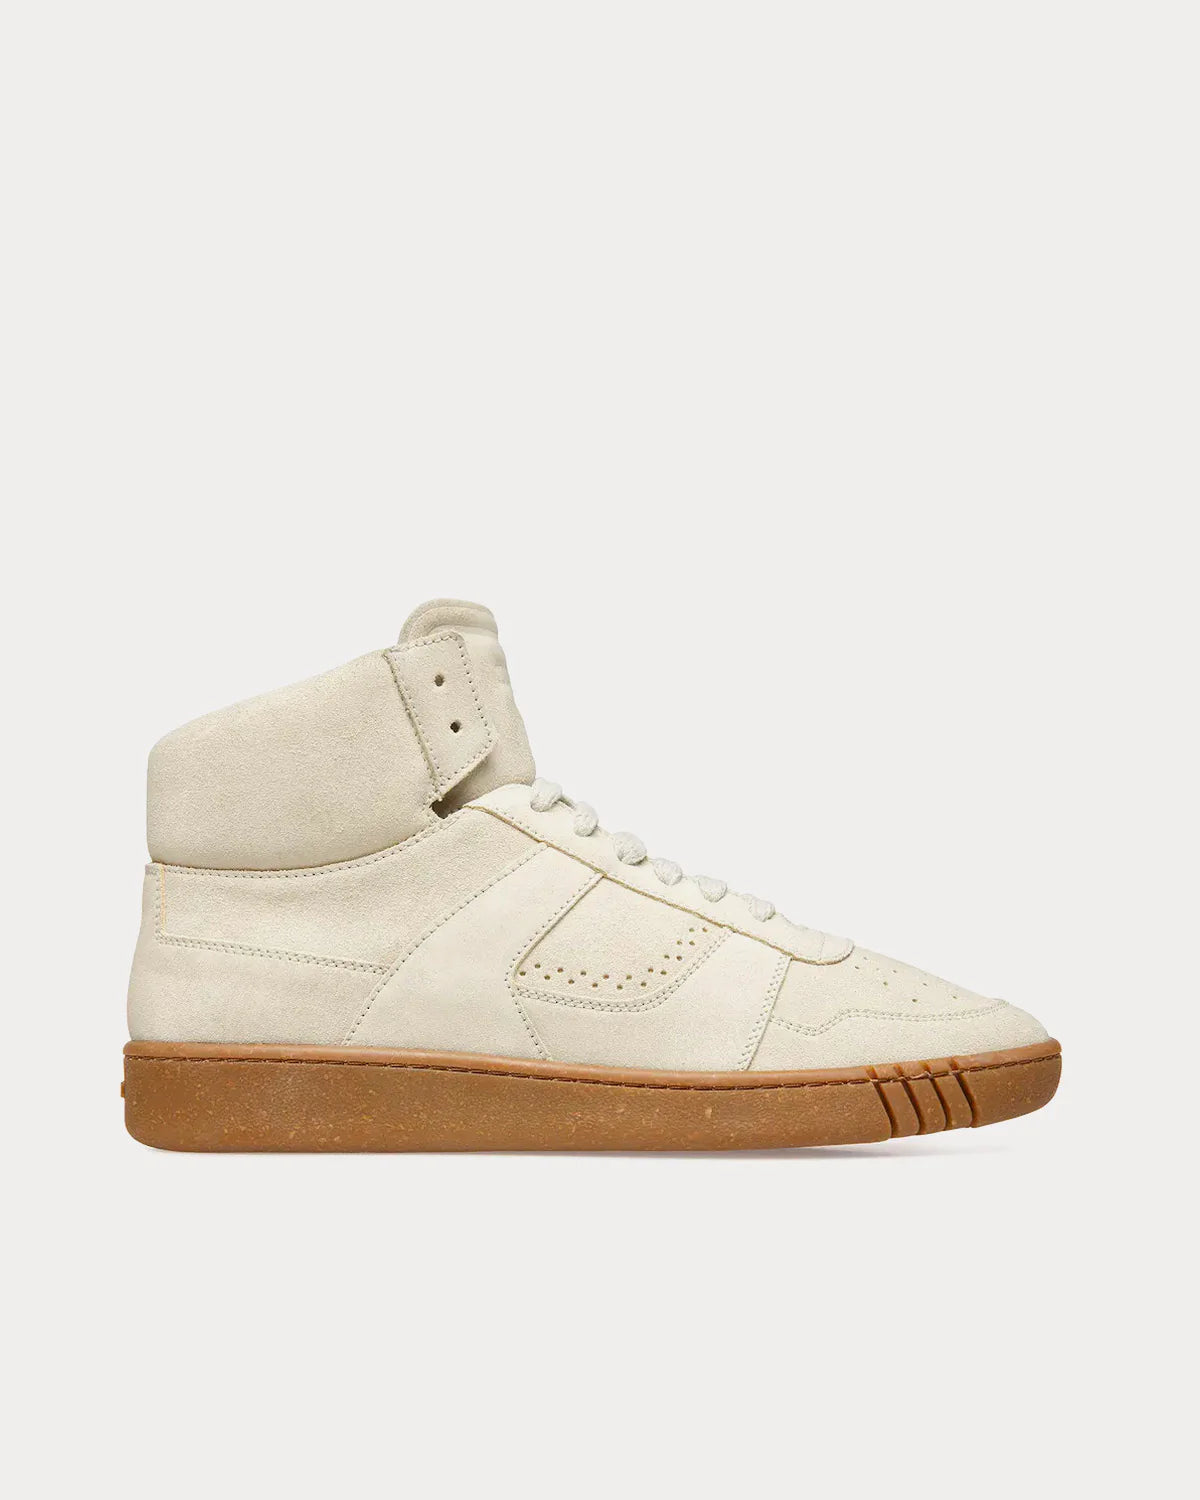 BALLY WIGGLES W DUSTY WHITE 50 CALF SUEDE WOMENS TRAINERS